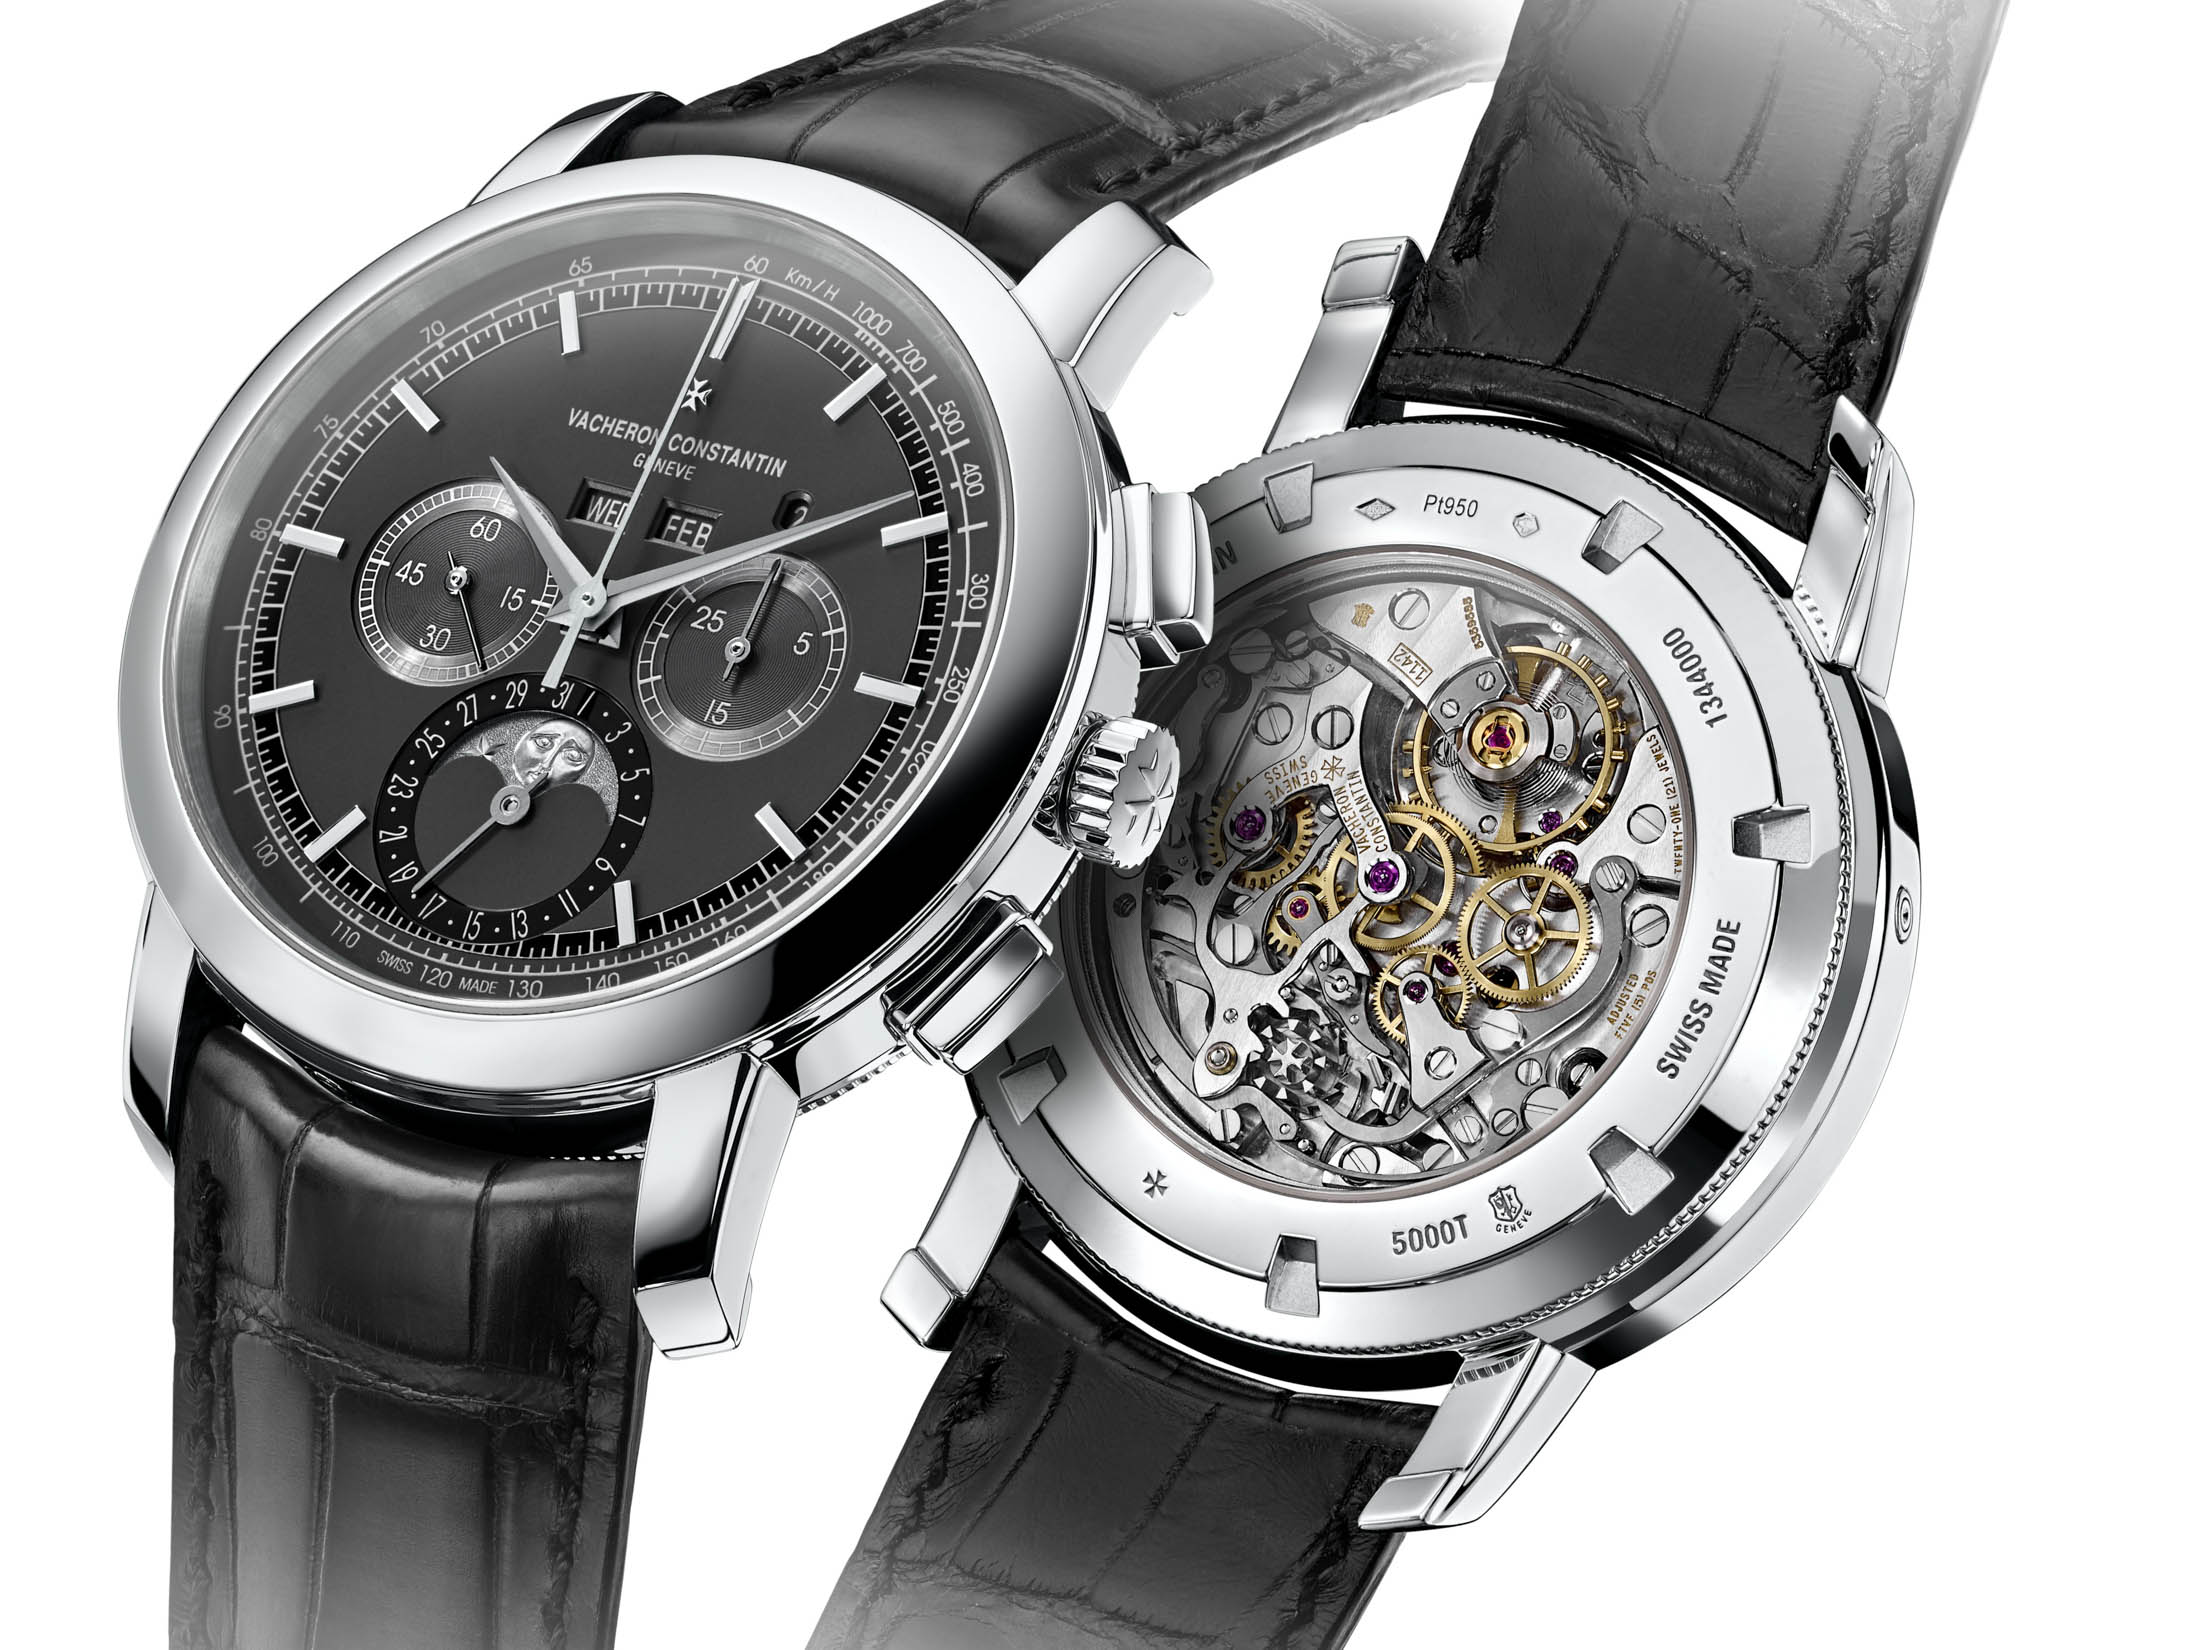 The New $150,000 Platinum Watch Is a Big Step for Vacheron Constantin